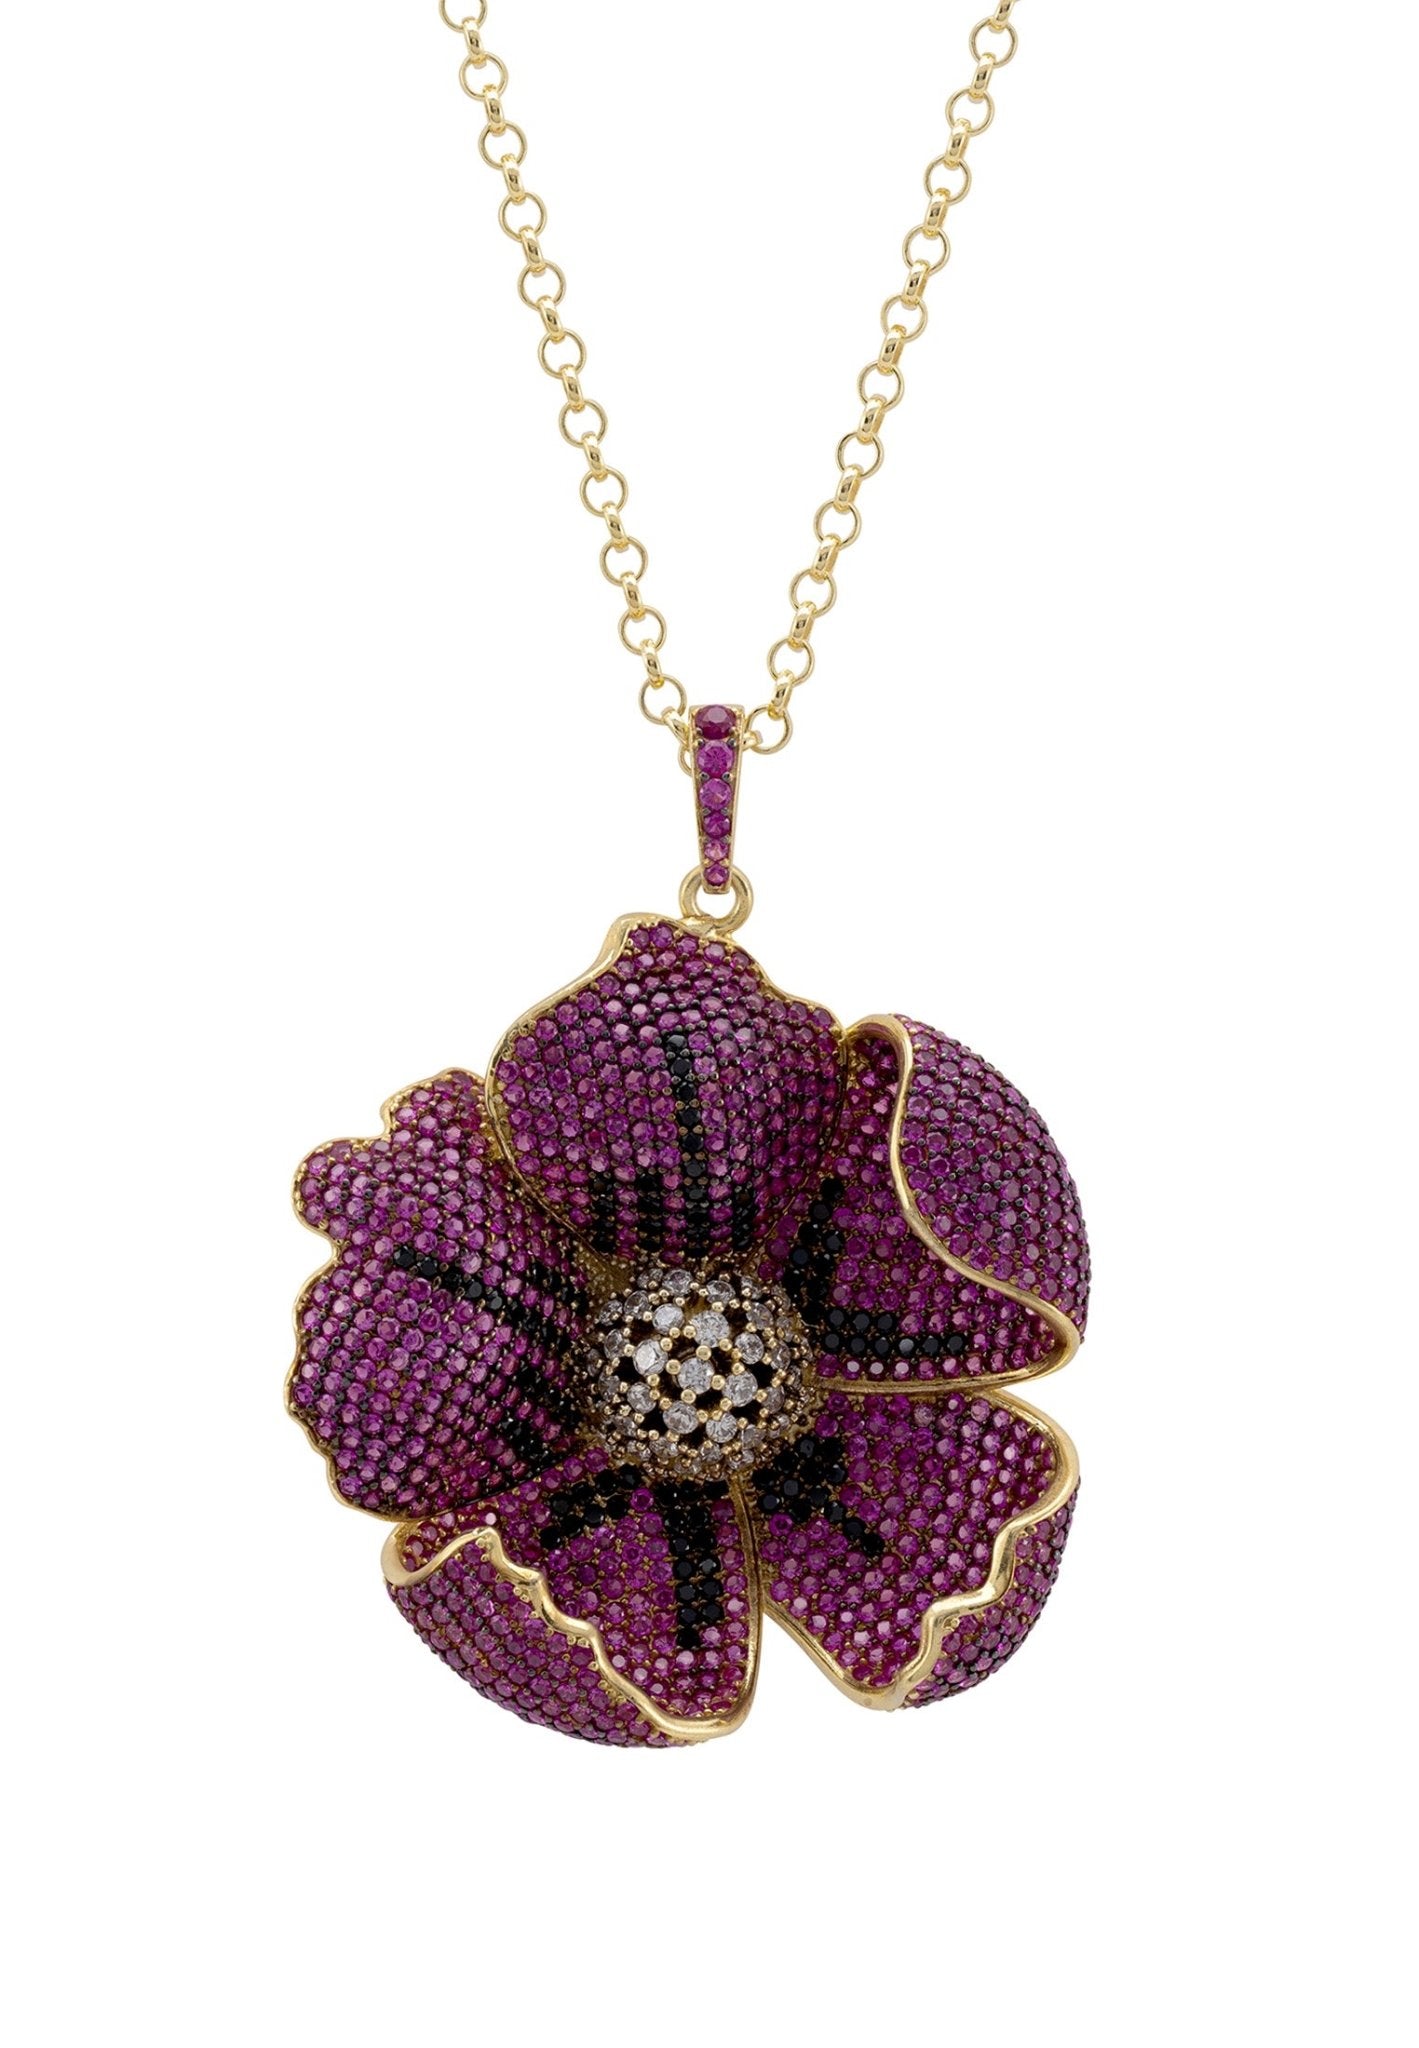 Poppy Pendant Necklace Gold Ruby Red Cz - LATELITA Necklaces